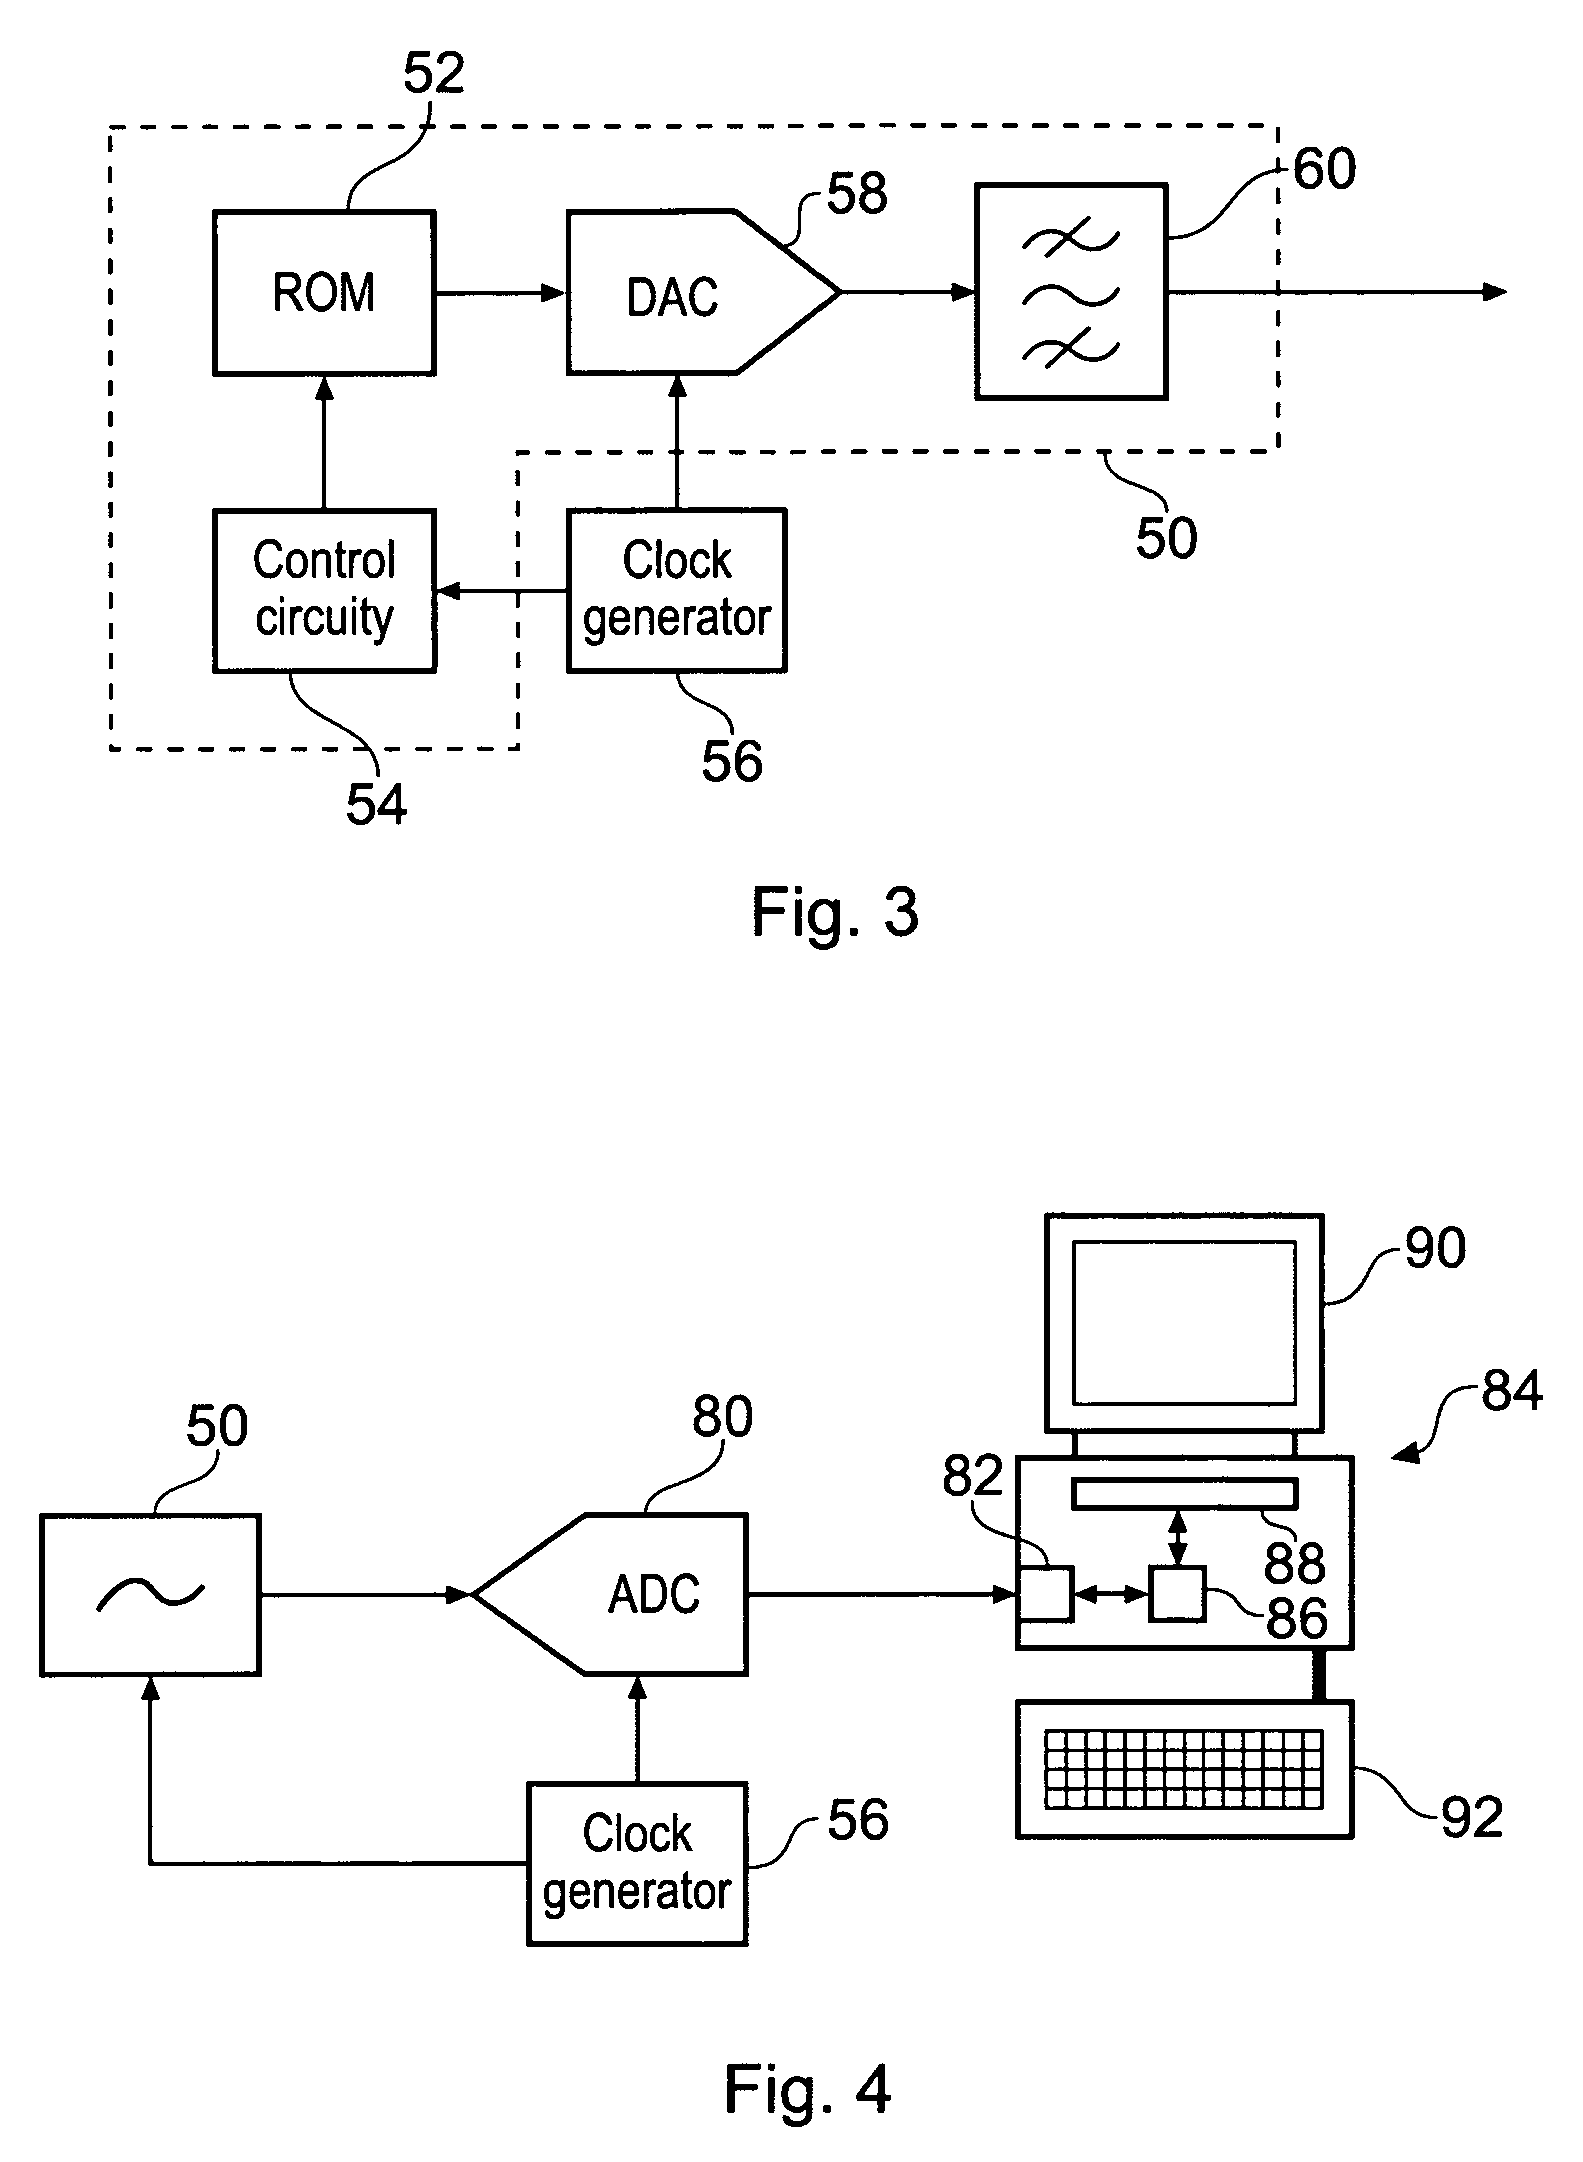 Method of and apparatus for characterizing an analog to digital converter